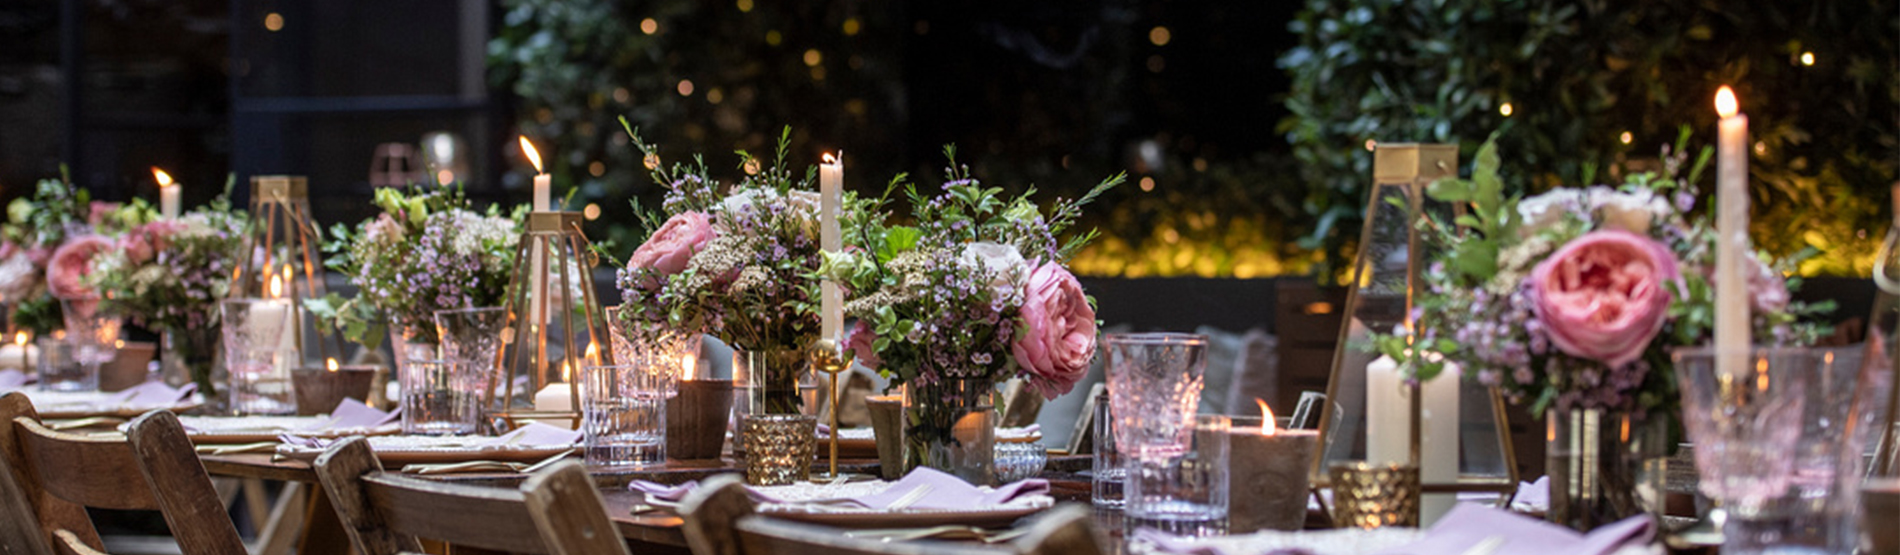 Long table with flowers, candles and crockery 